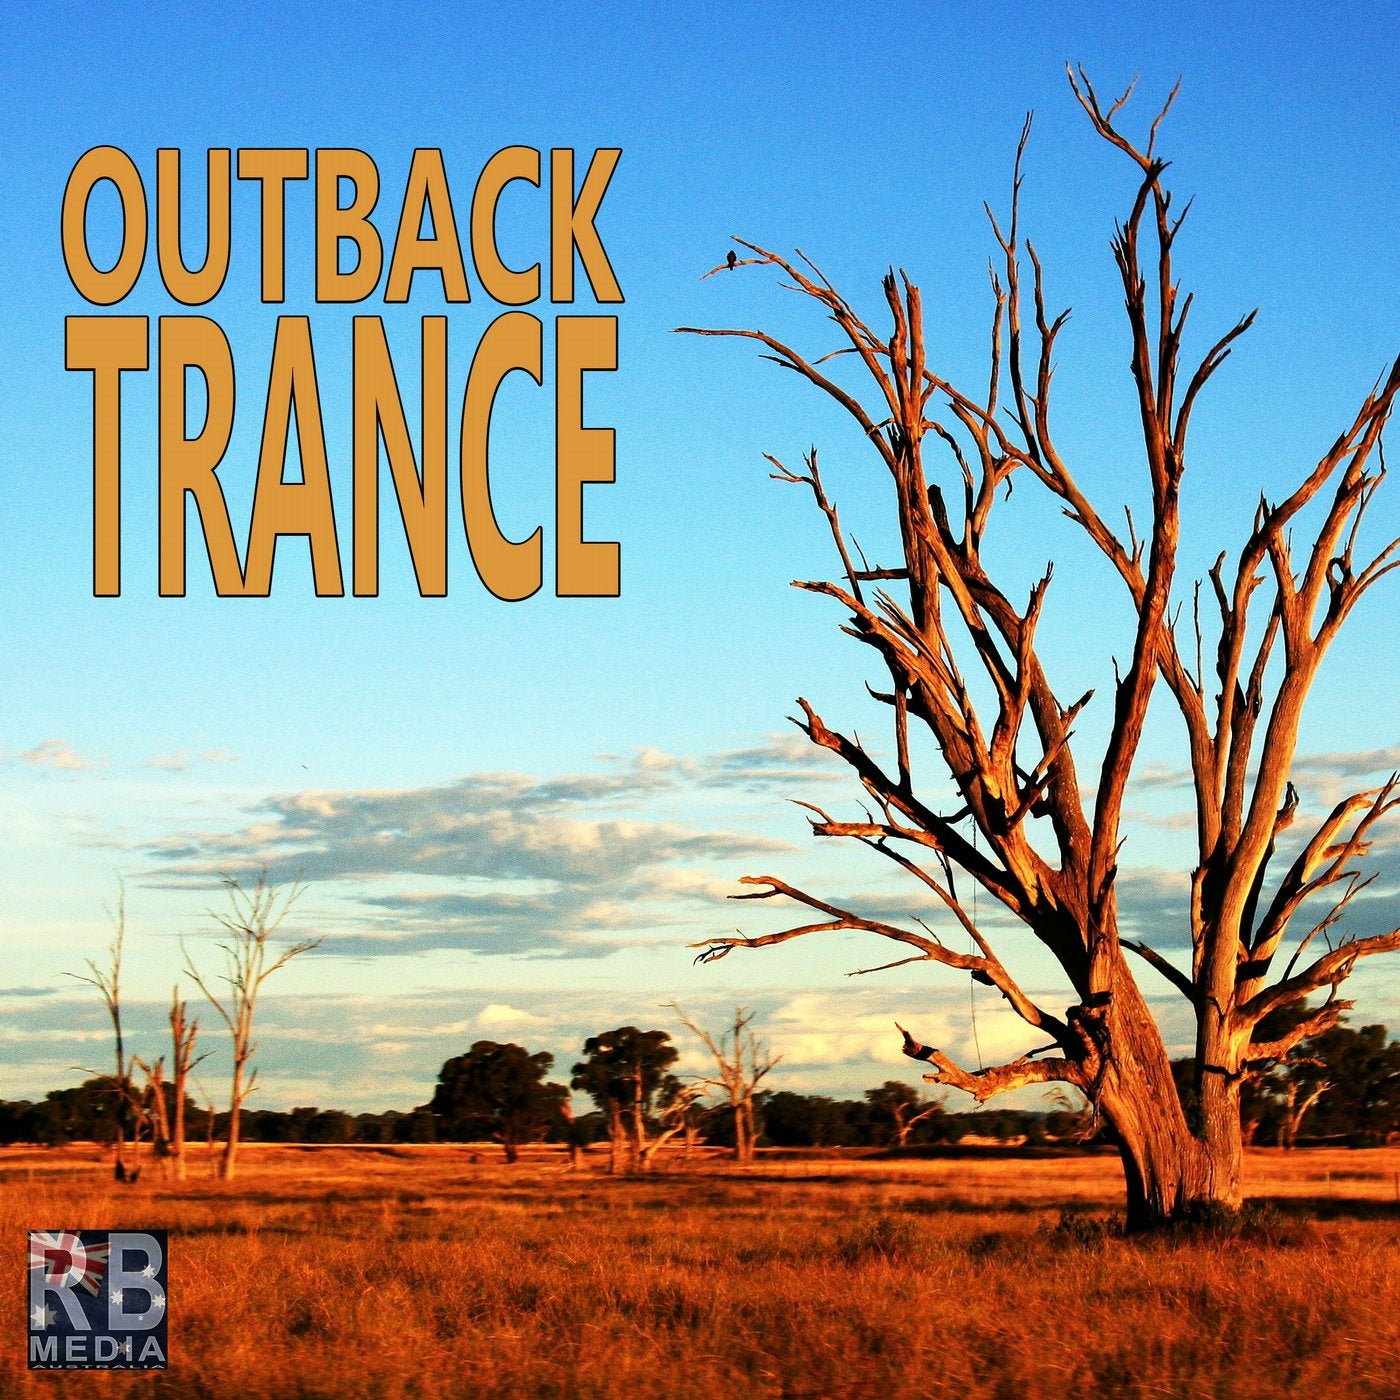 Outback Trance